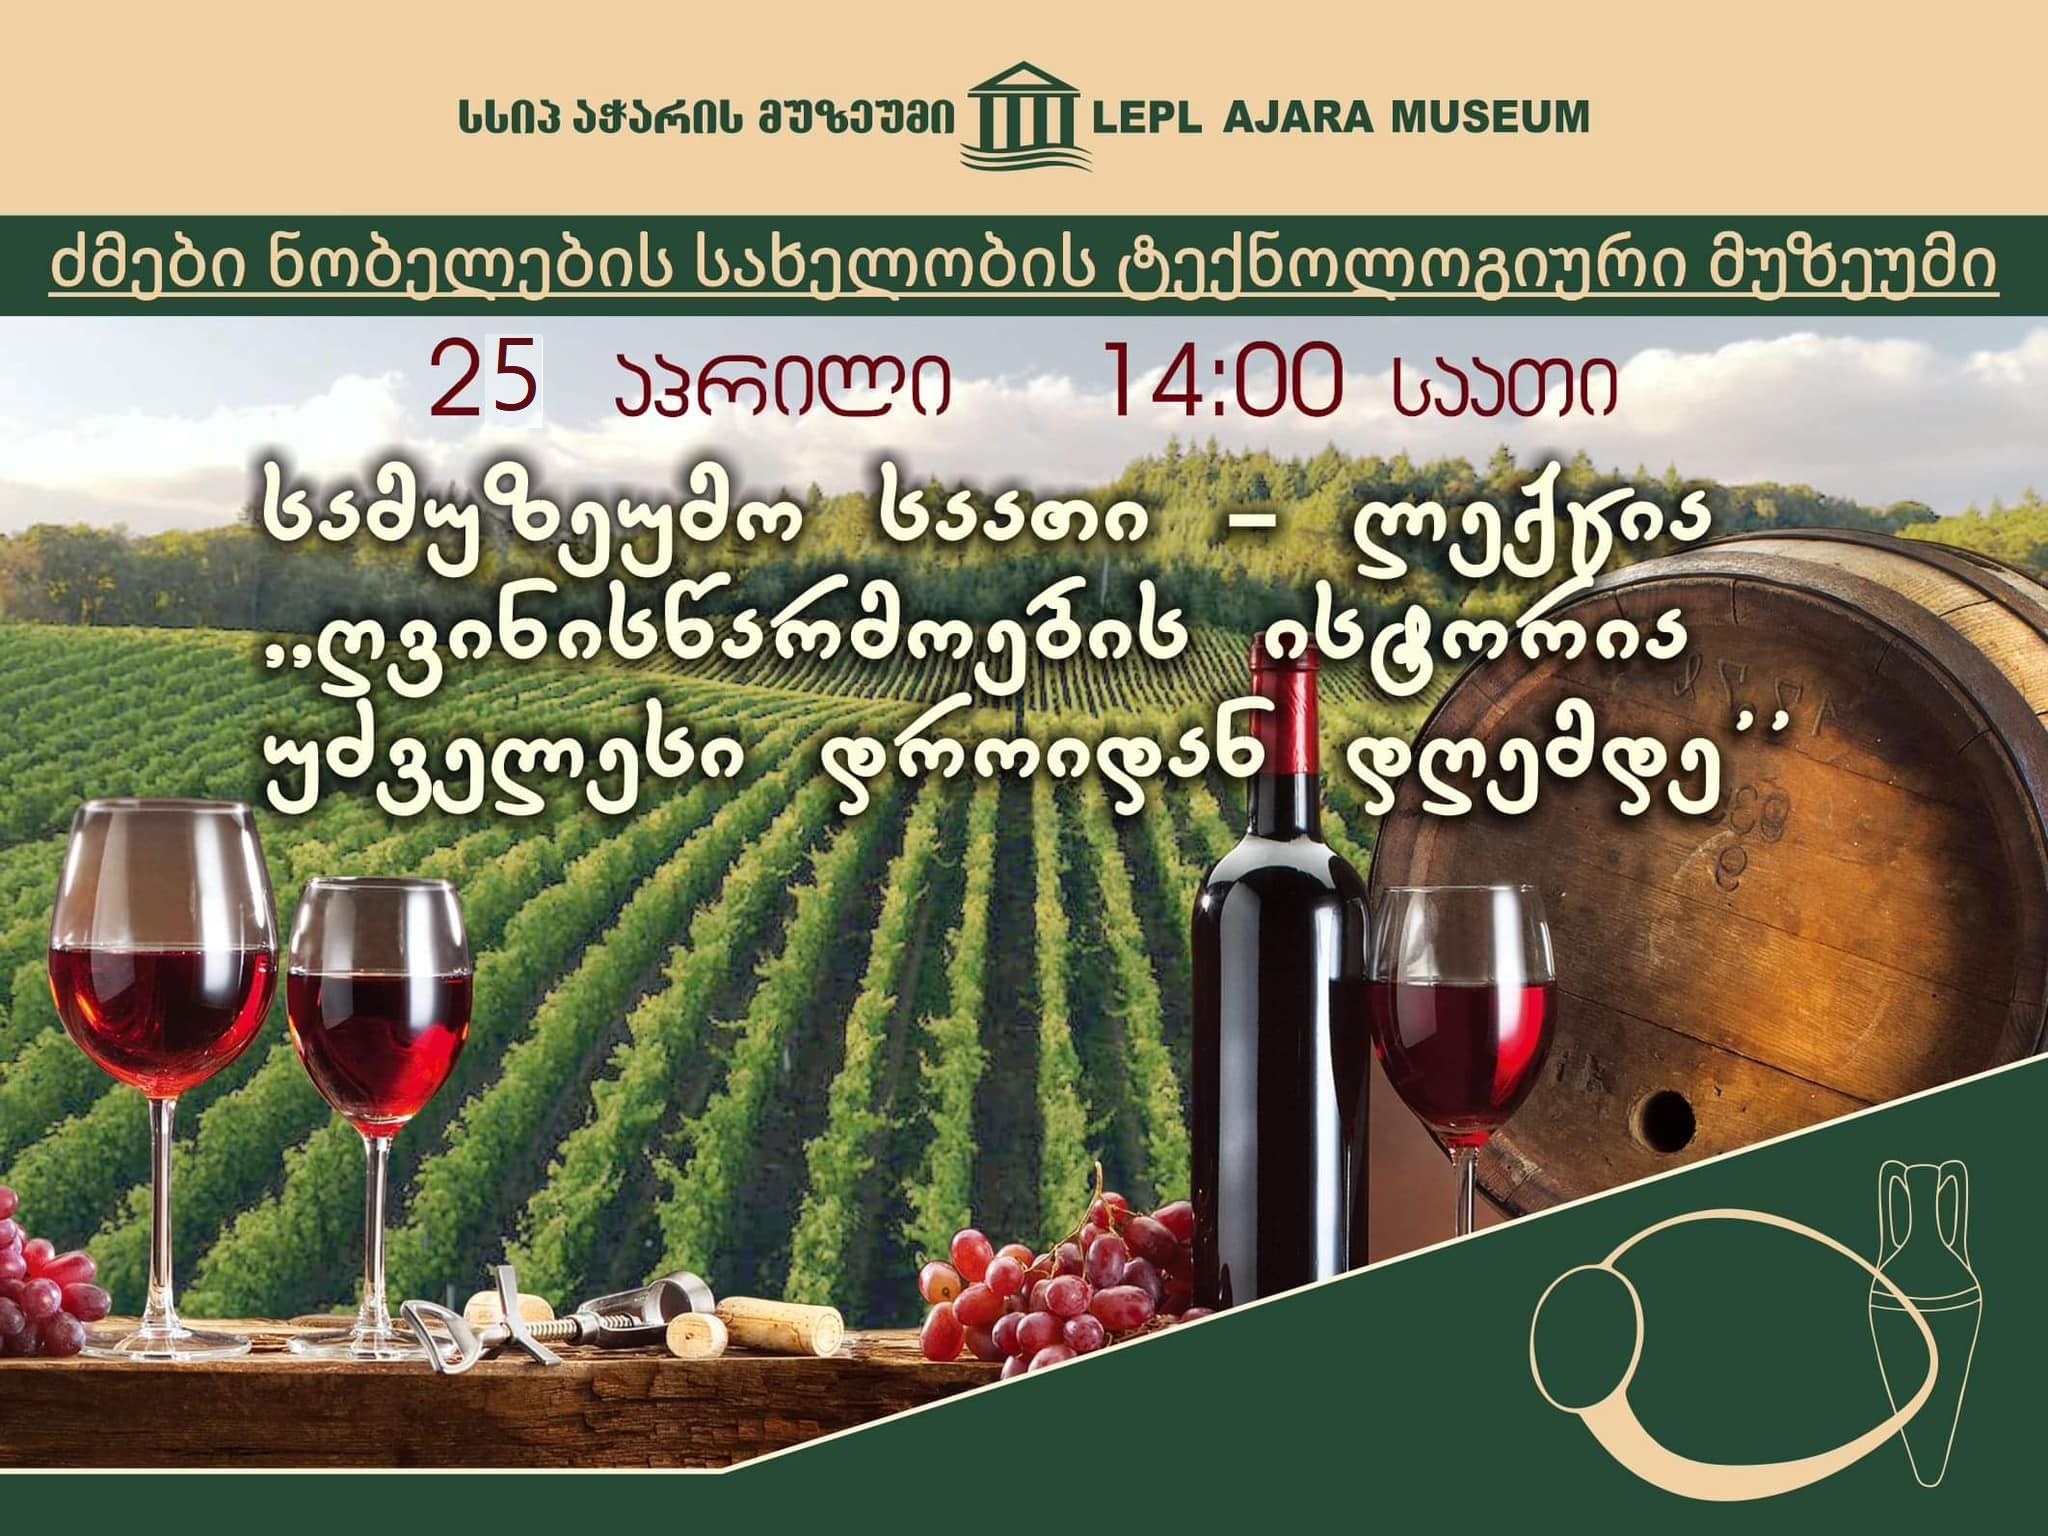 Public lecture -"The history of wine production from ancient times to the present day."